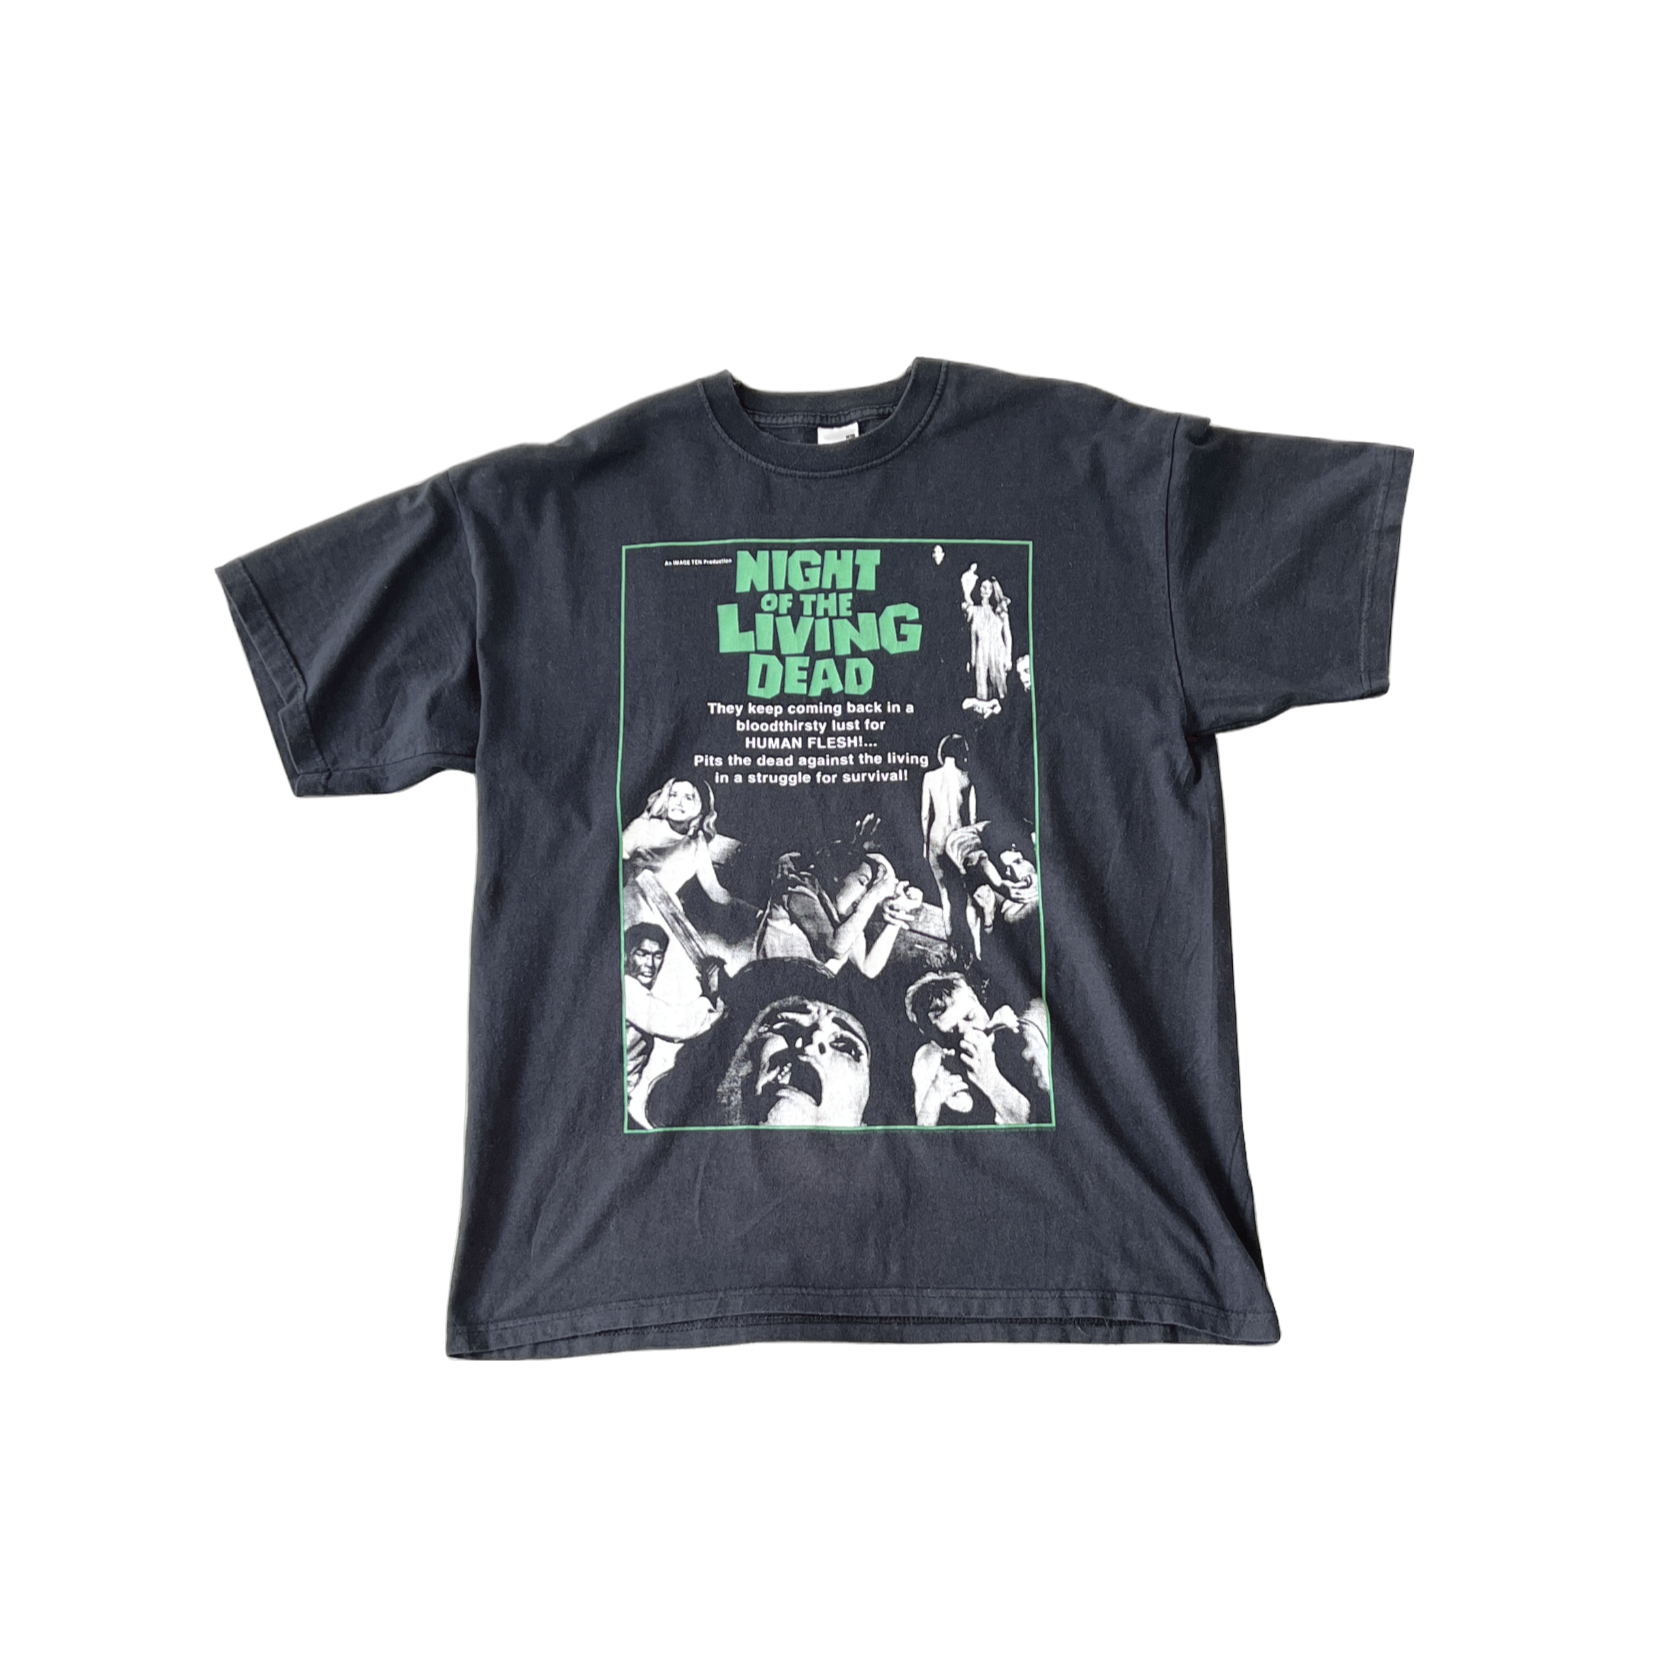 Night of the living dead - Tee